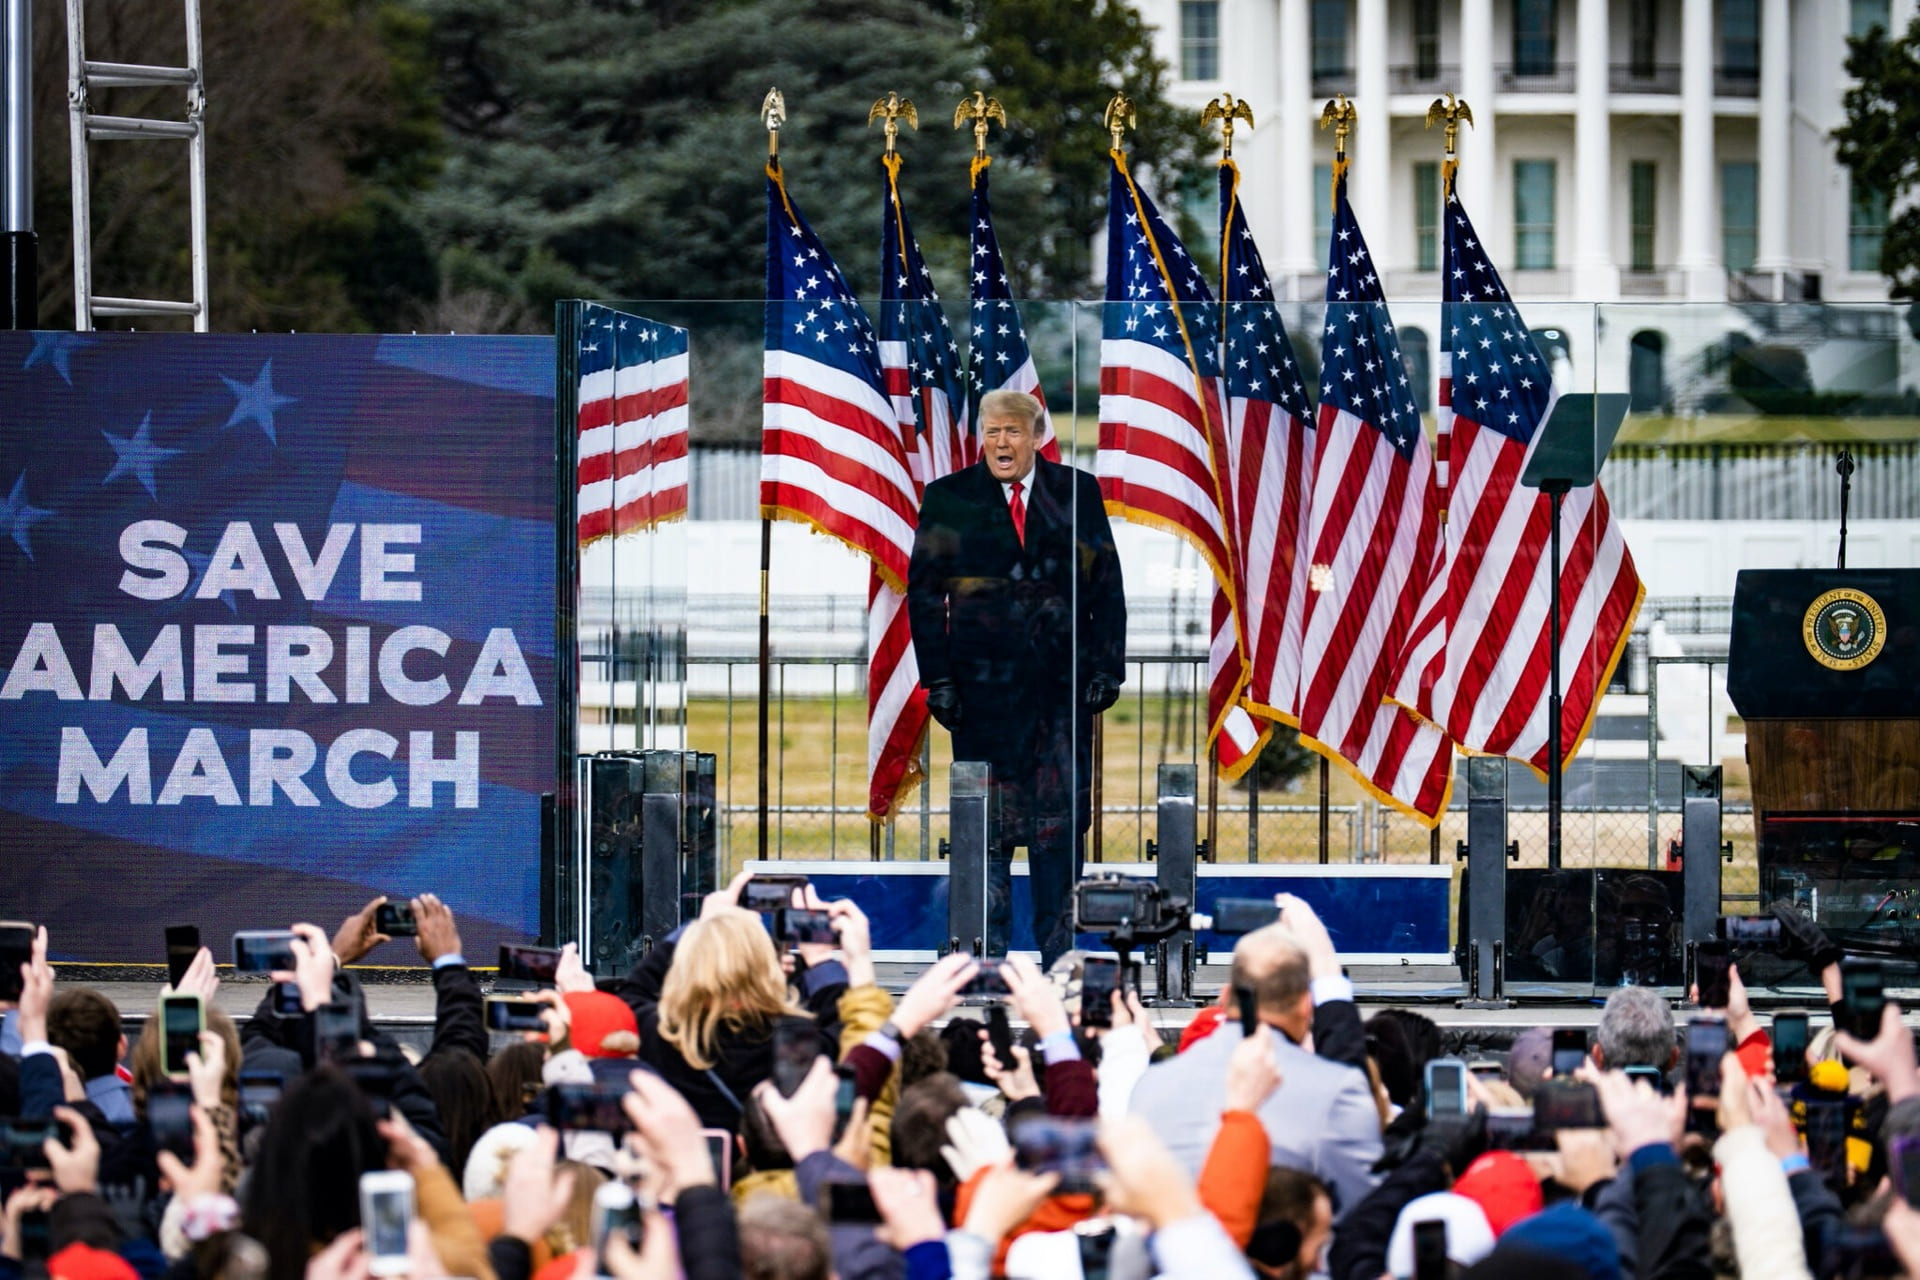 Donald Trump stands on stage next to a sign saying "Save America March" and speaks to a large crowd